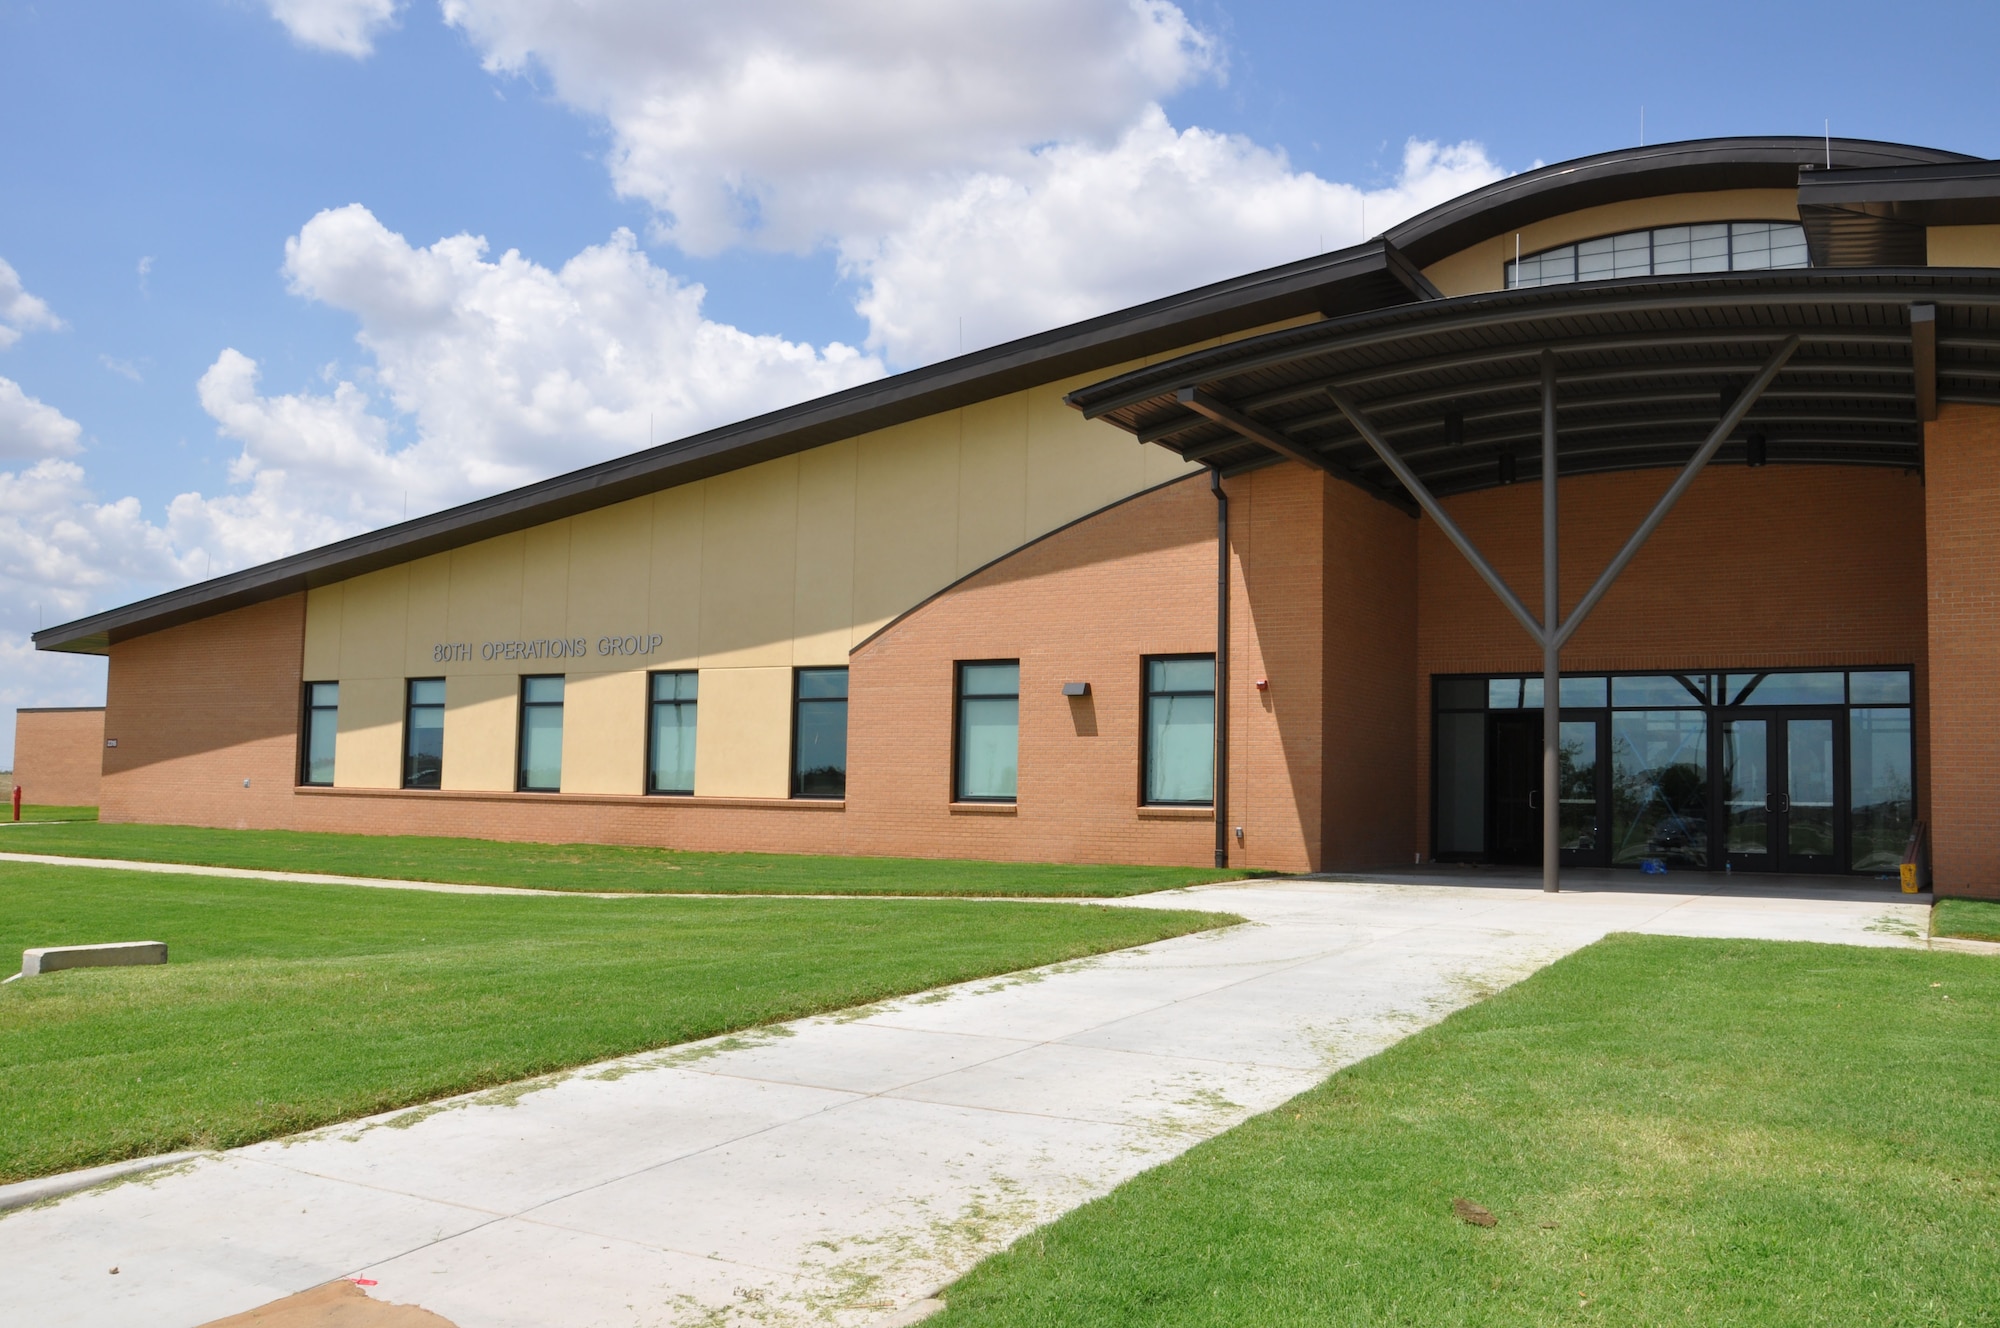 Front view of completed 80th Flying Training Wing Operations Group facility Aug. 28, 2012 at Sheppard Air Force Base, Texas.  The new building is estimated to save 50 percent annually in utility costs using energy-saving principles, which also increases sustainability.  (U.S. Air Force photo/2Lt Sara Harper)